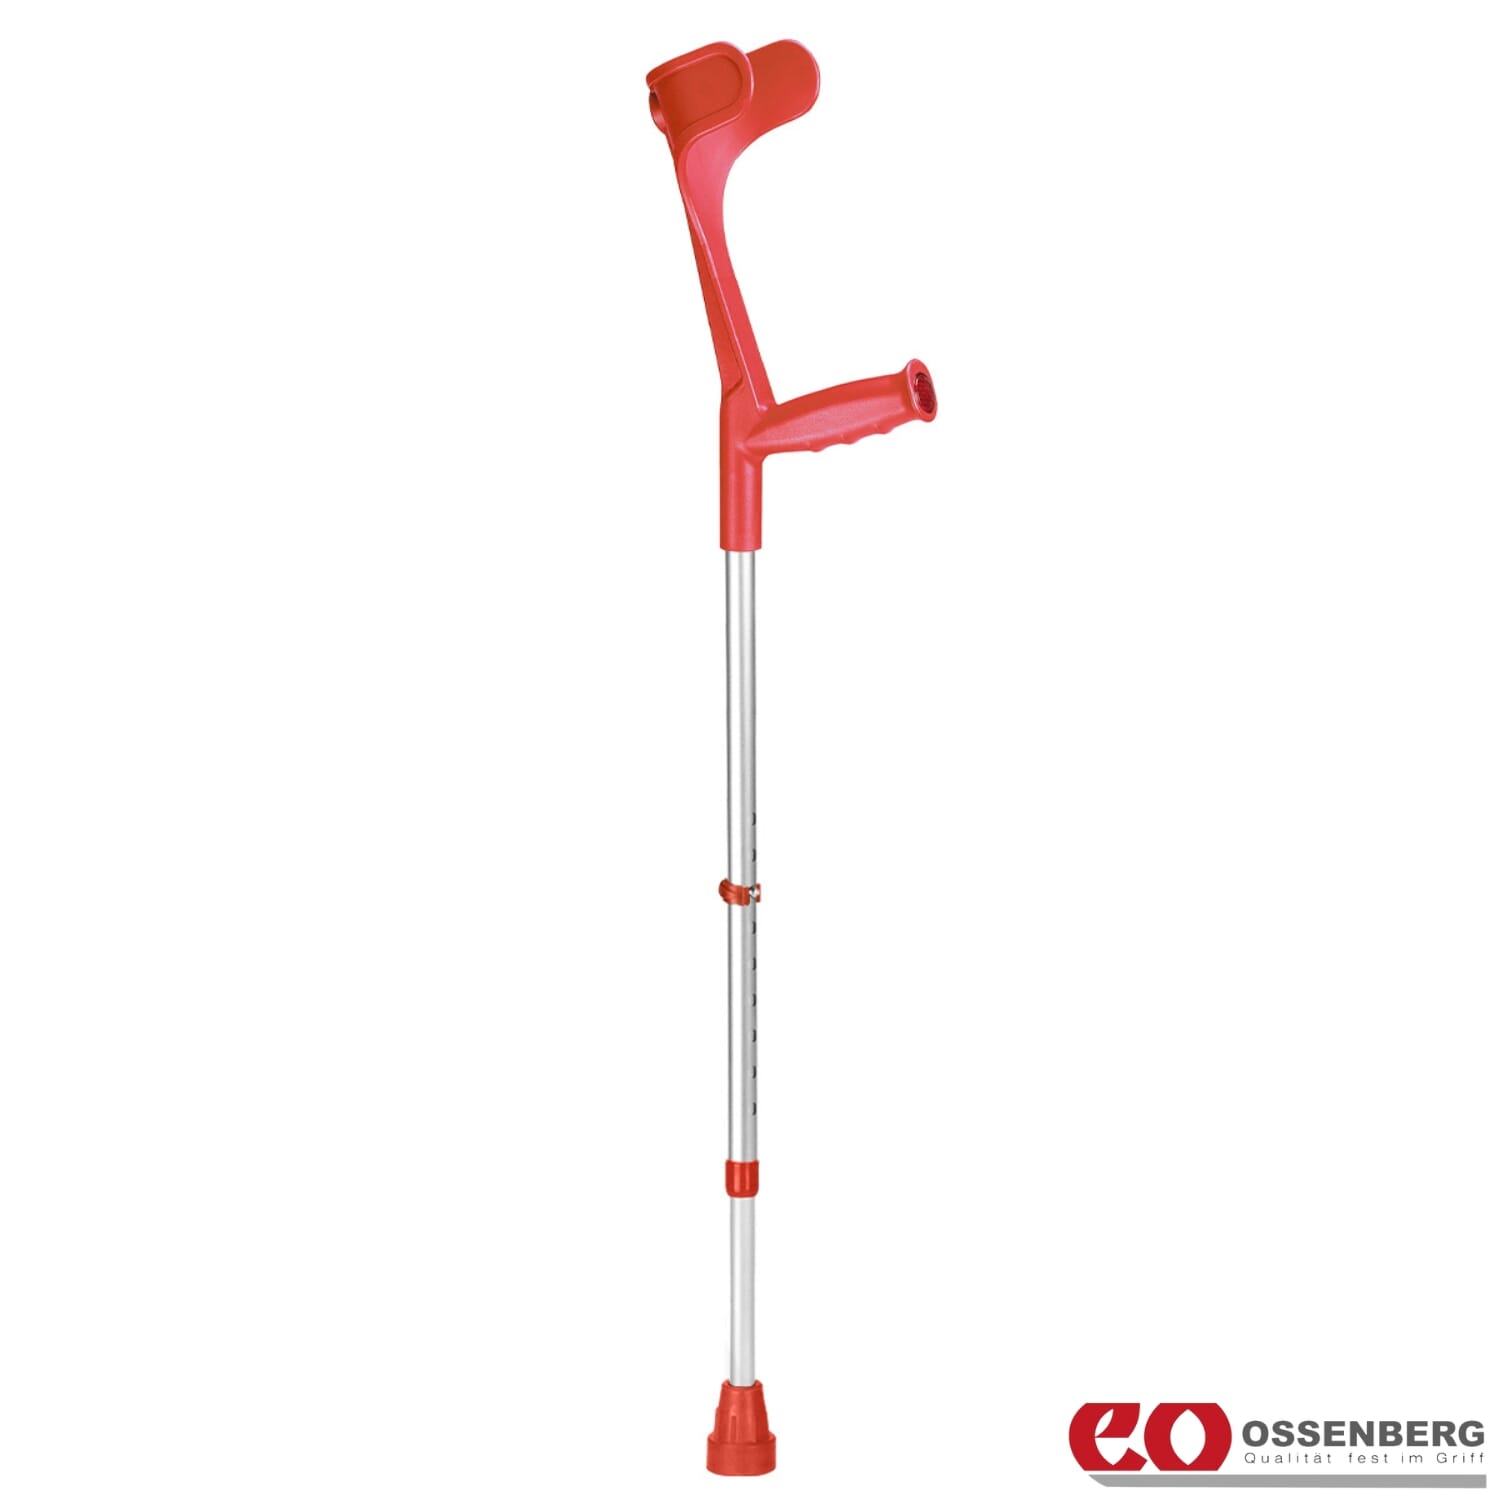 View Ossenberg Open Cuff Crutches Red Single information